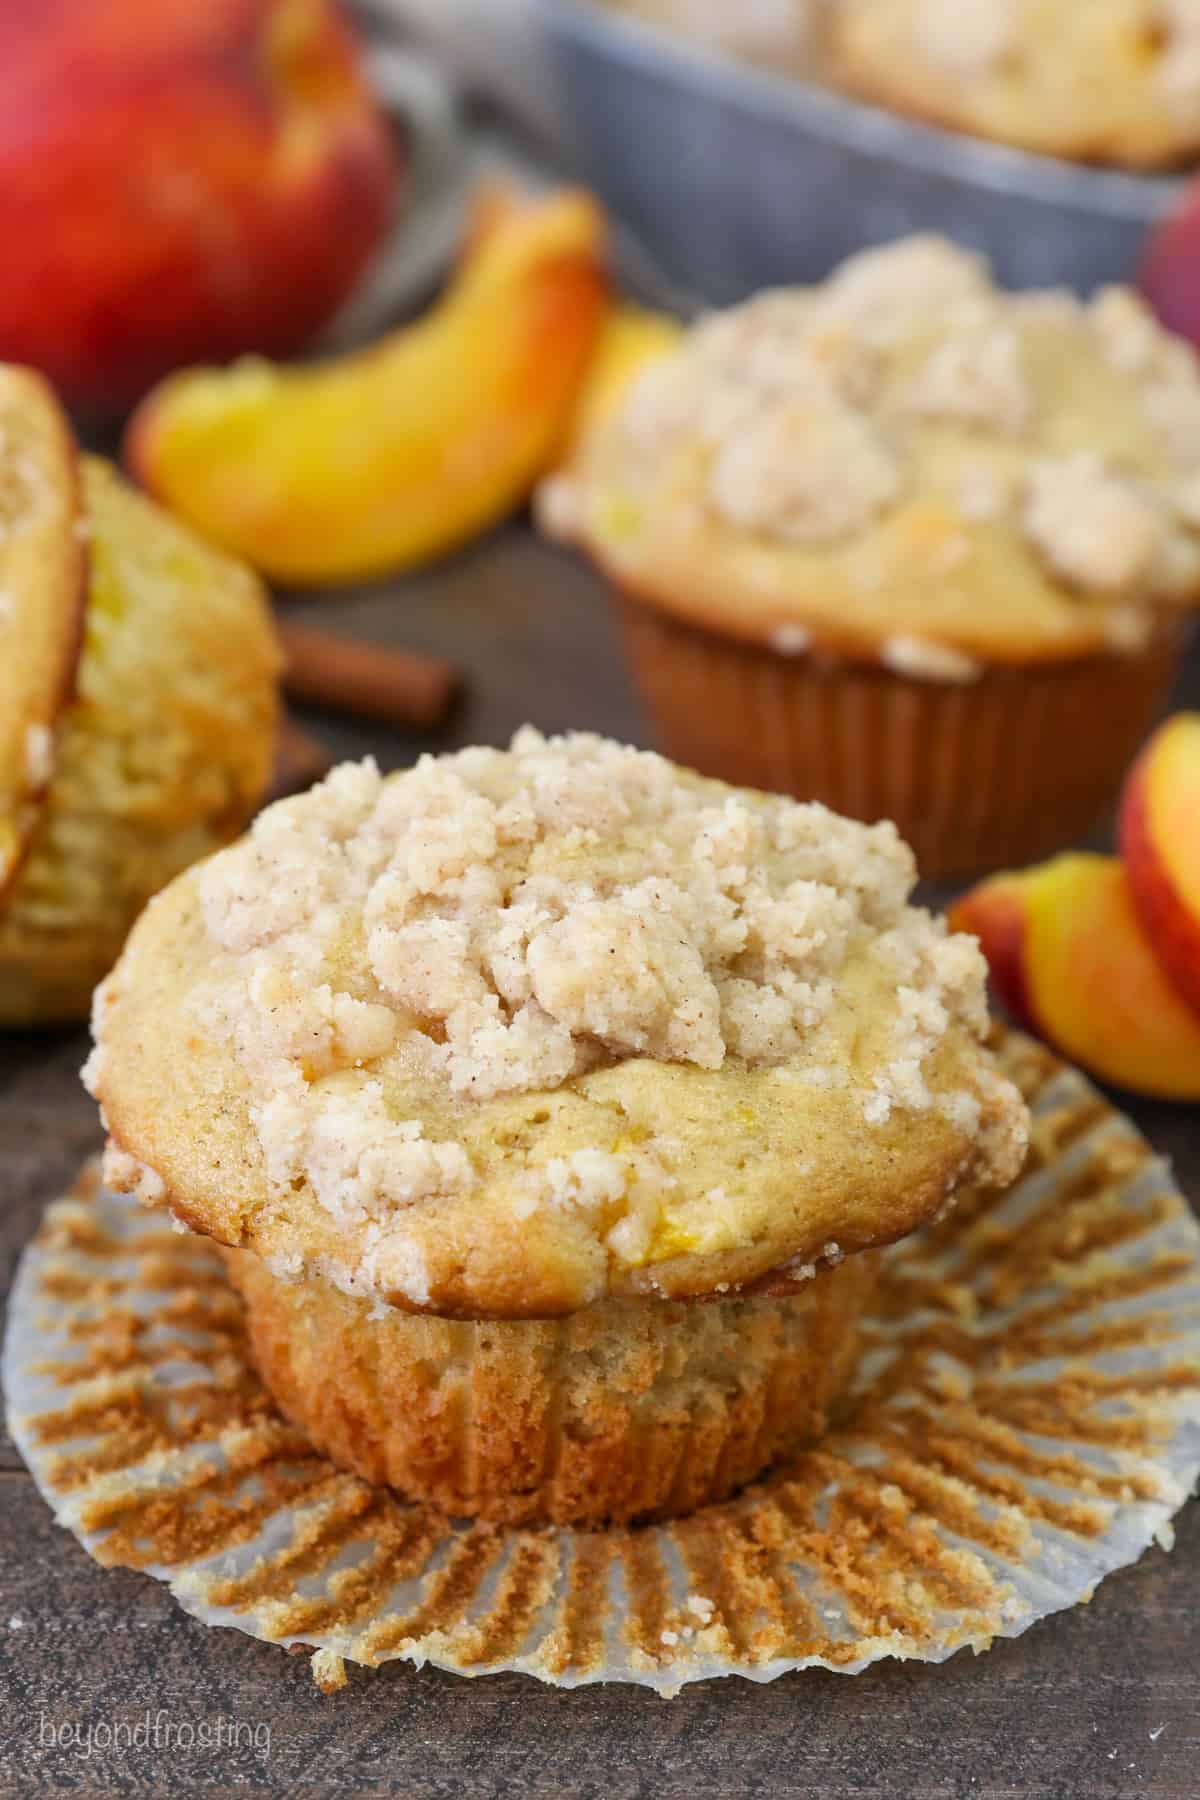 A peach macadamia nut muffin in an unwrapped muffin liner, with another muffin and peach slices in the background.